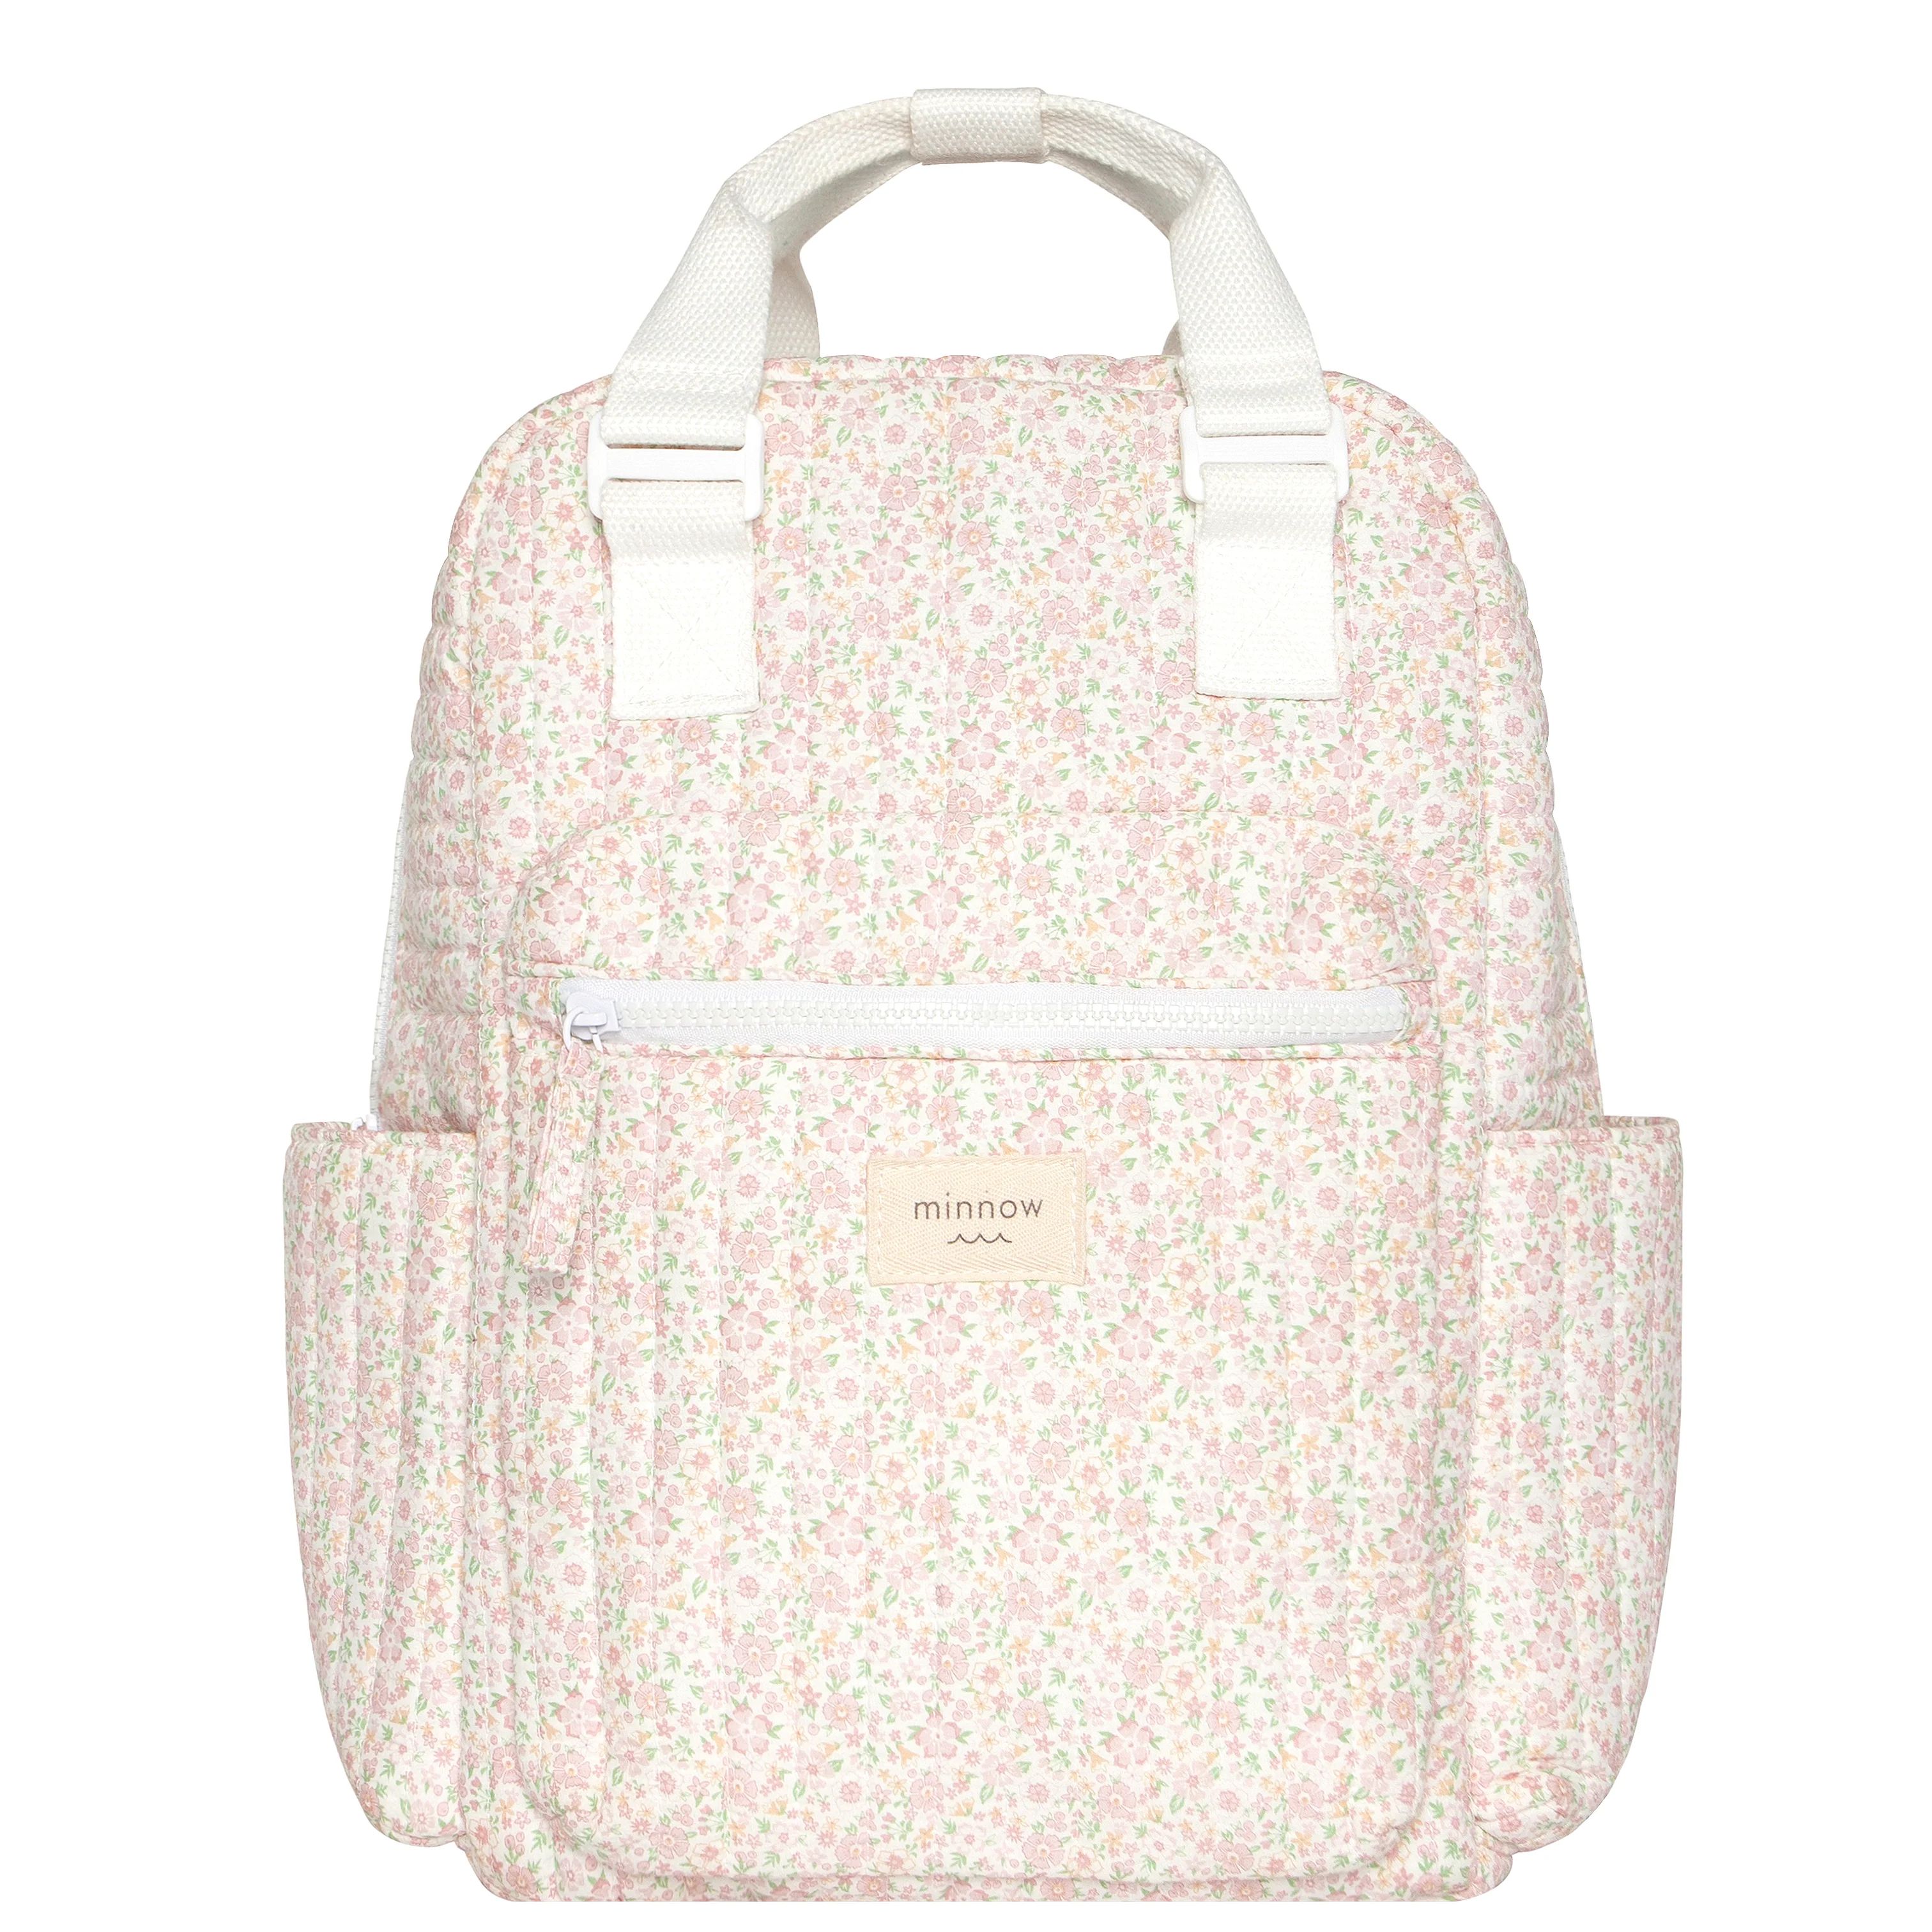 antique floral everyday backpack | minnow